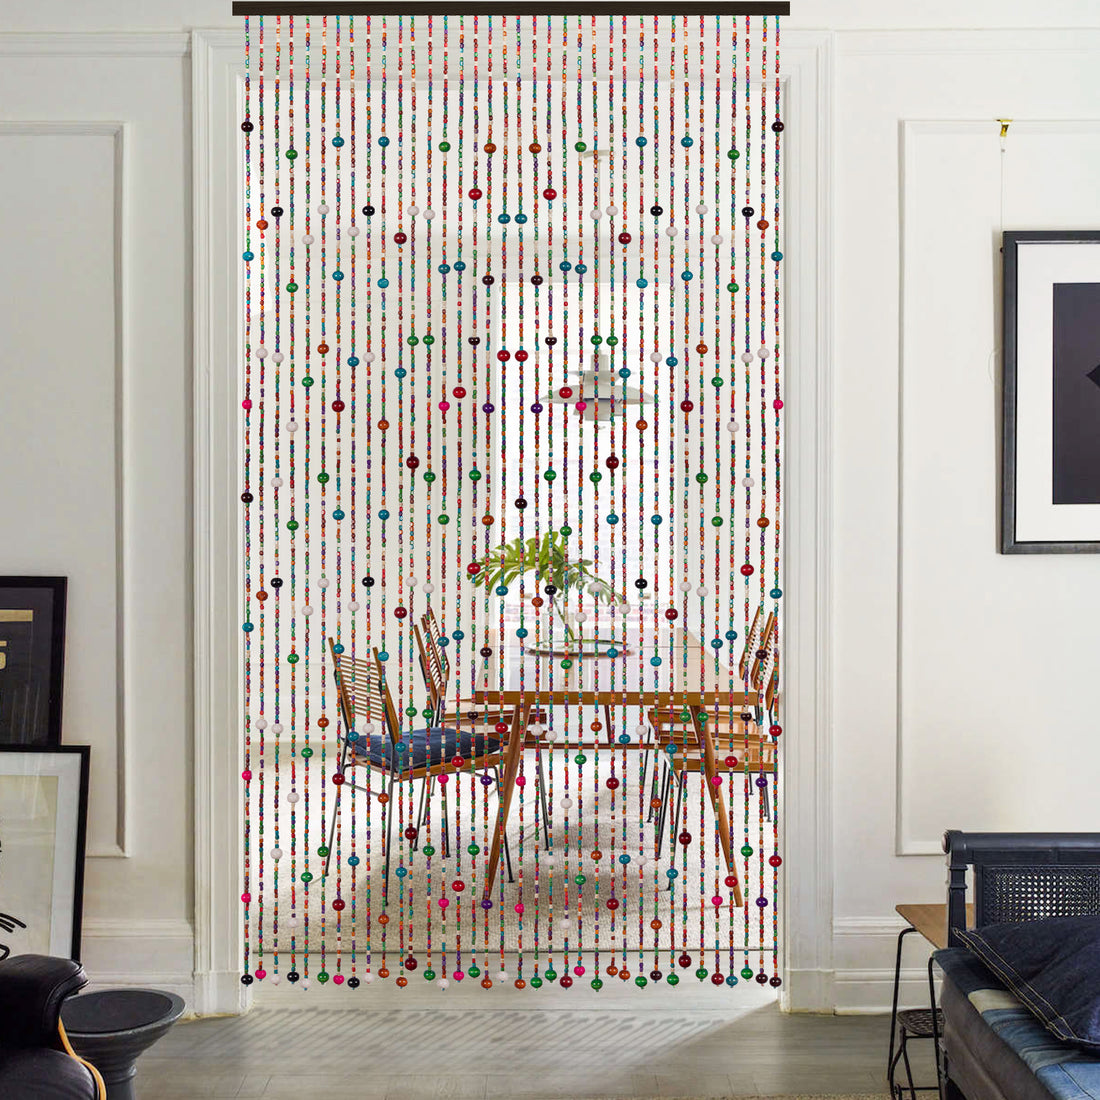 Unique Home Decorcolorful Hippie Beaded Curtain for a Window 